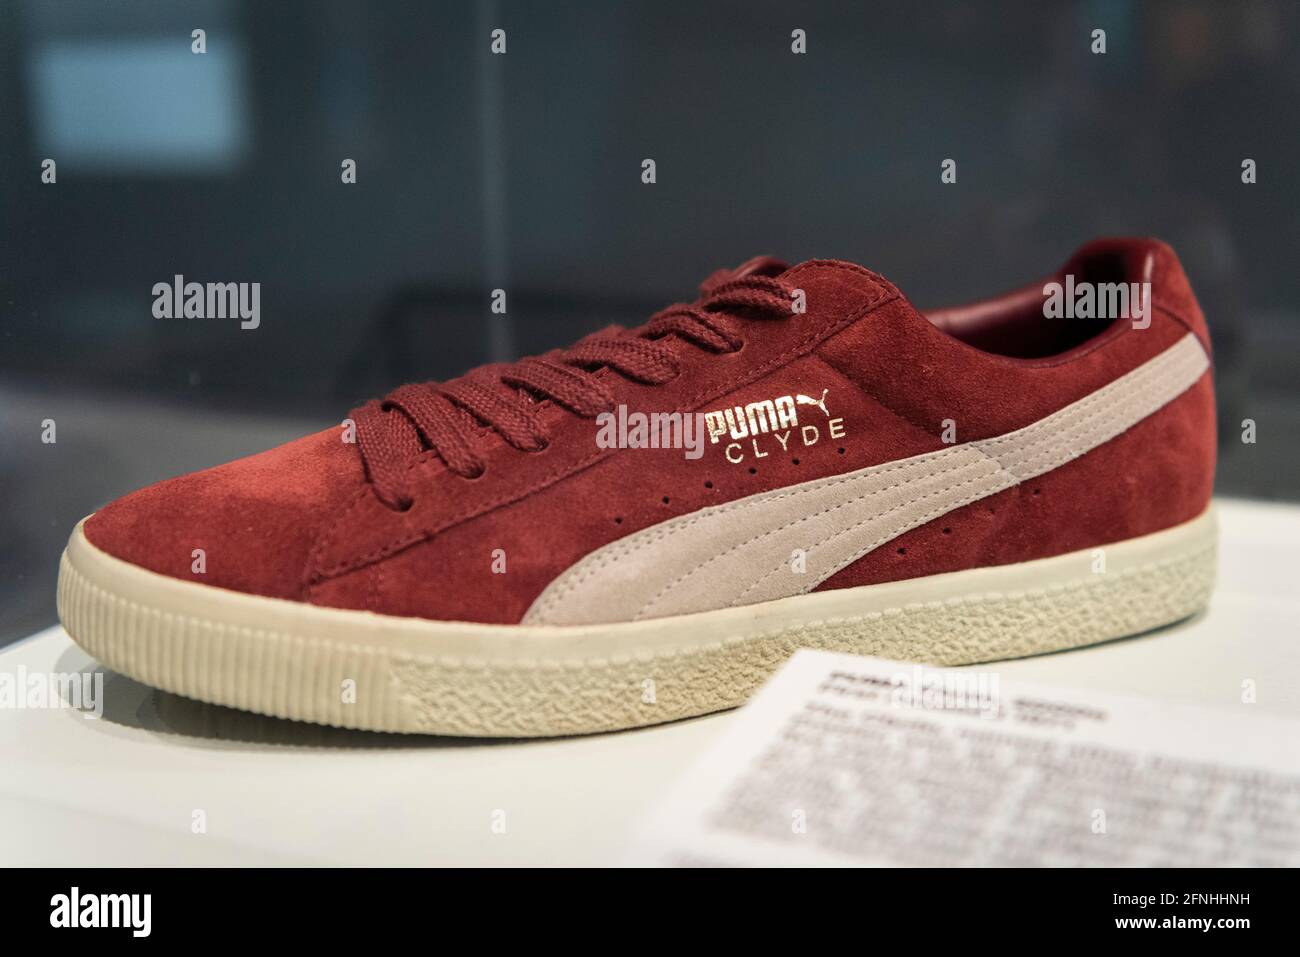 London, UK. 17 2021. "Puma Clyde", 2000s, first released 1971. Named after Walt "Clyde" Frazier, the first basketball player to be paid to wear a specific shoe. of “Sneakers Unboxed: